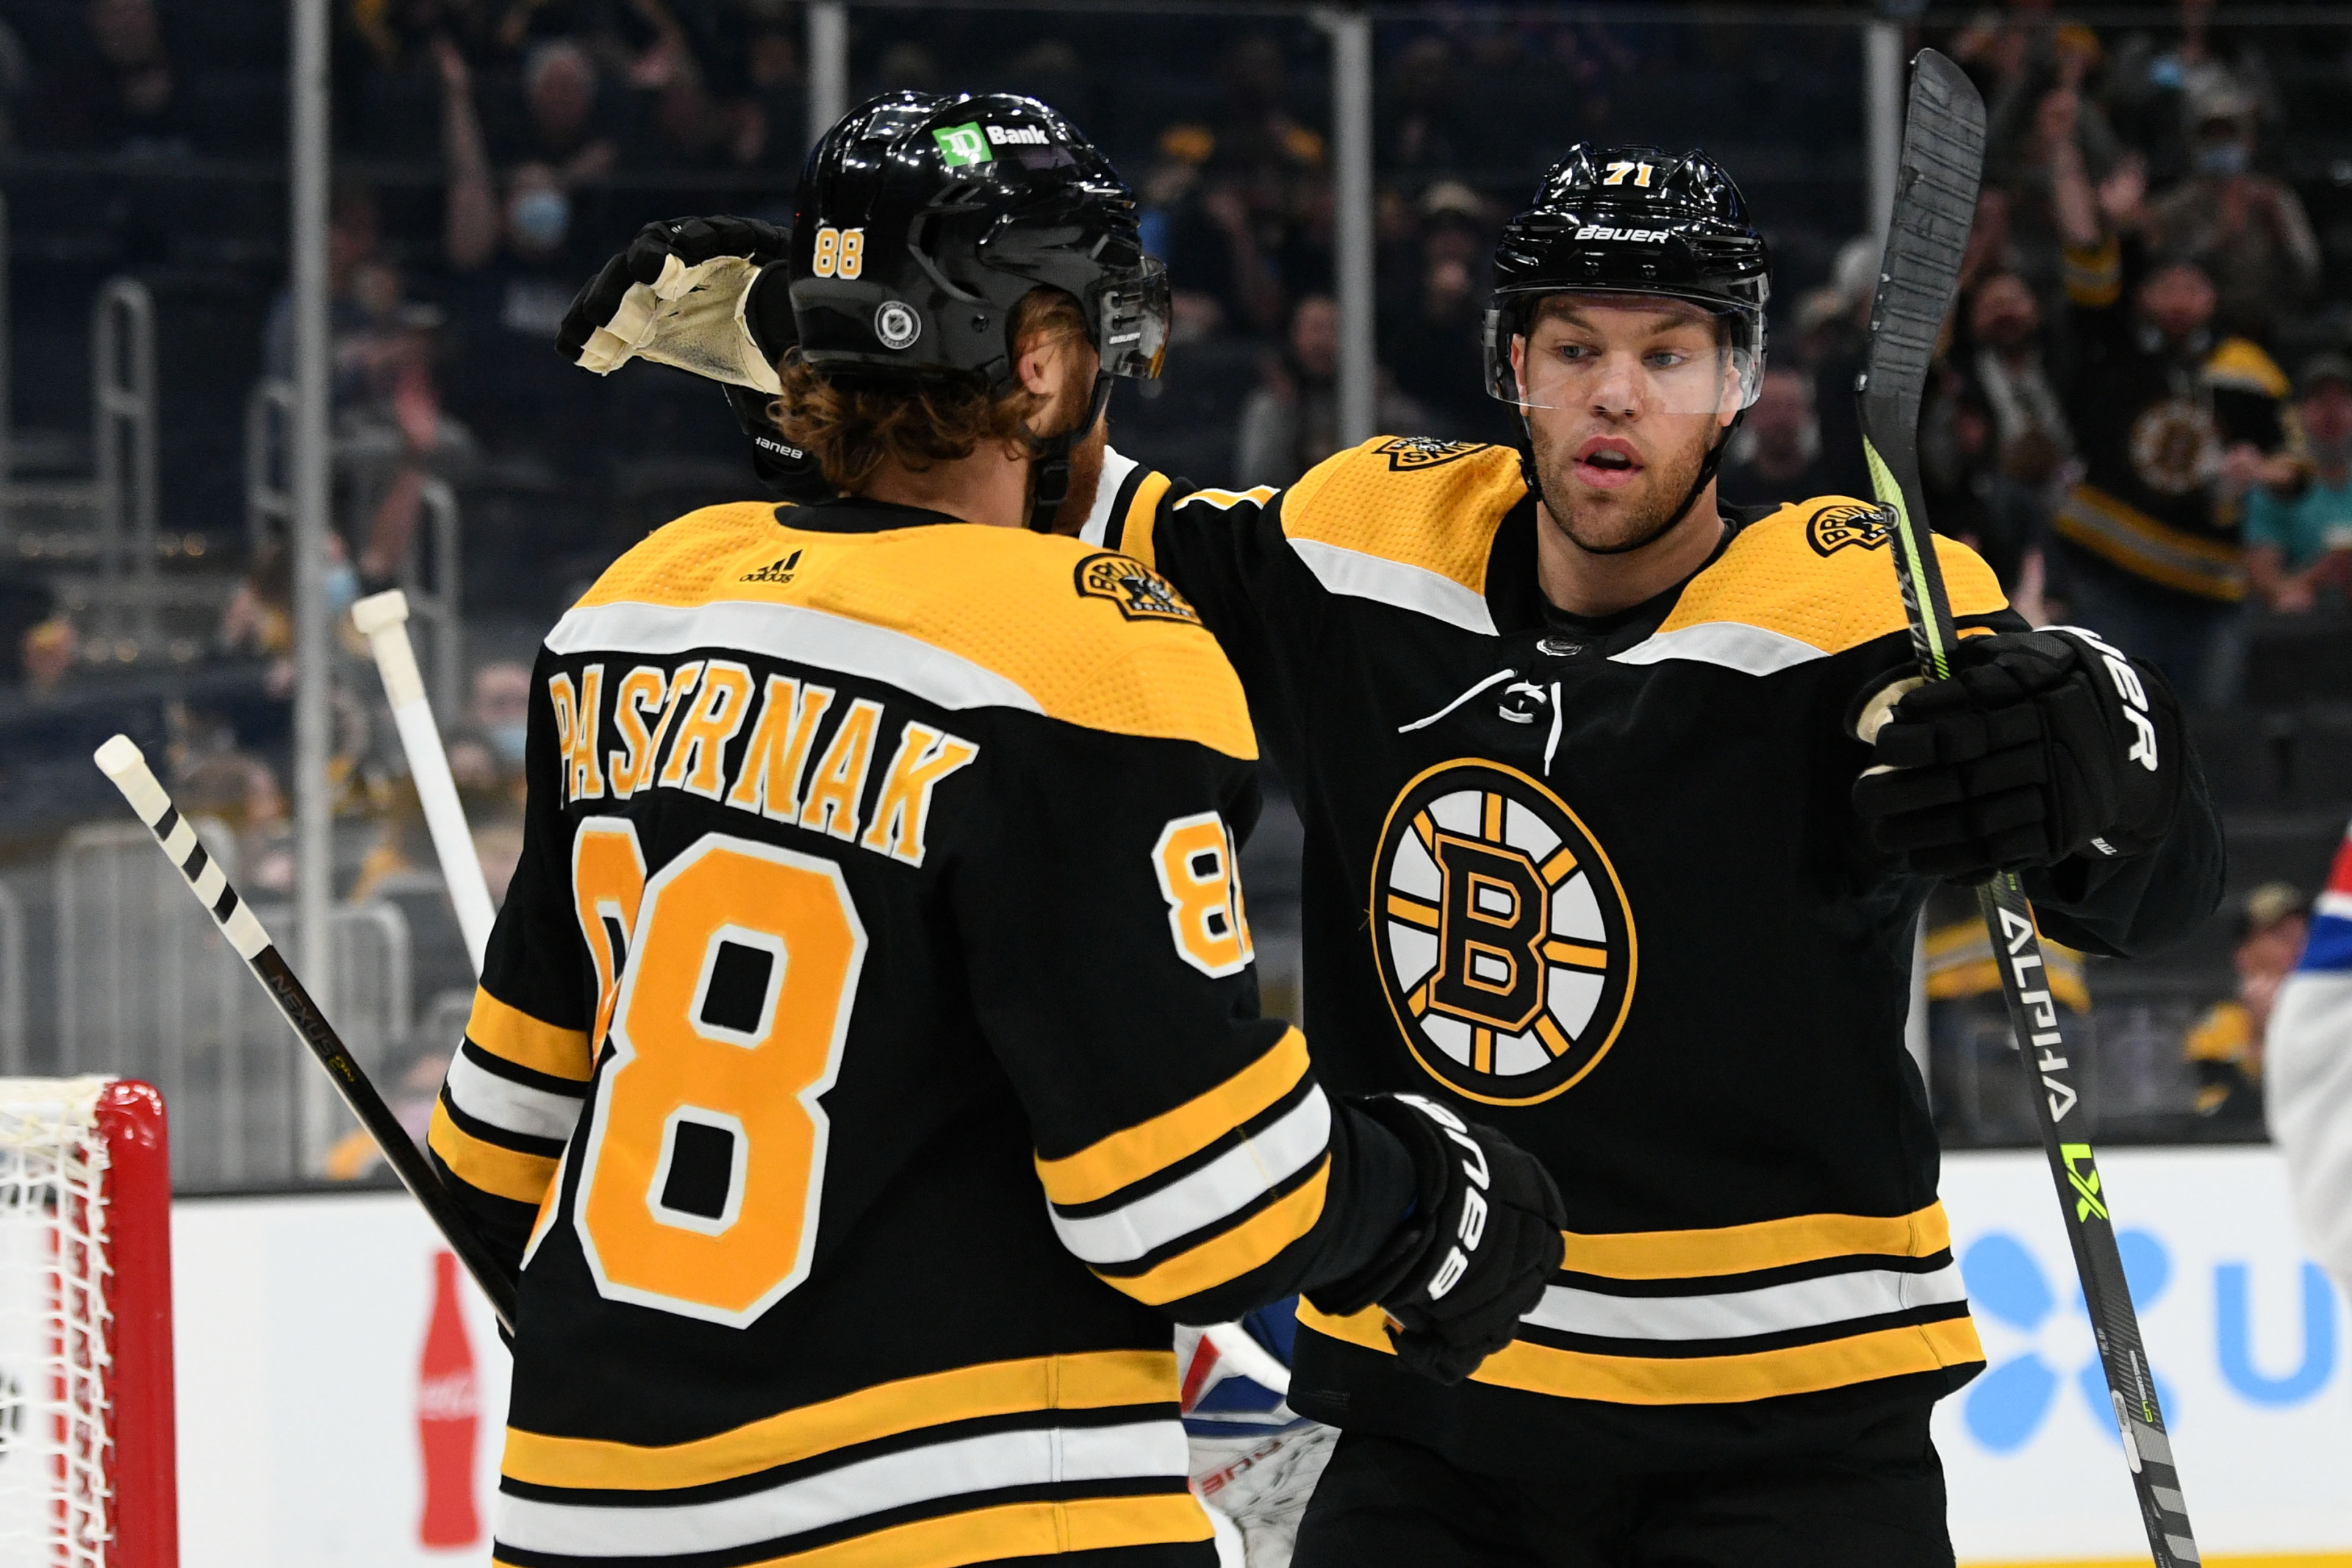 DeBrusk stays in Boston -- perhaps for two more seasons, too